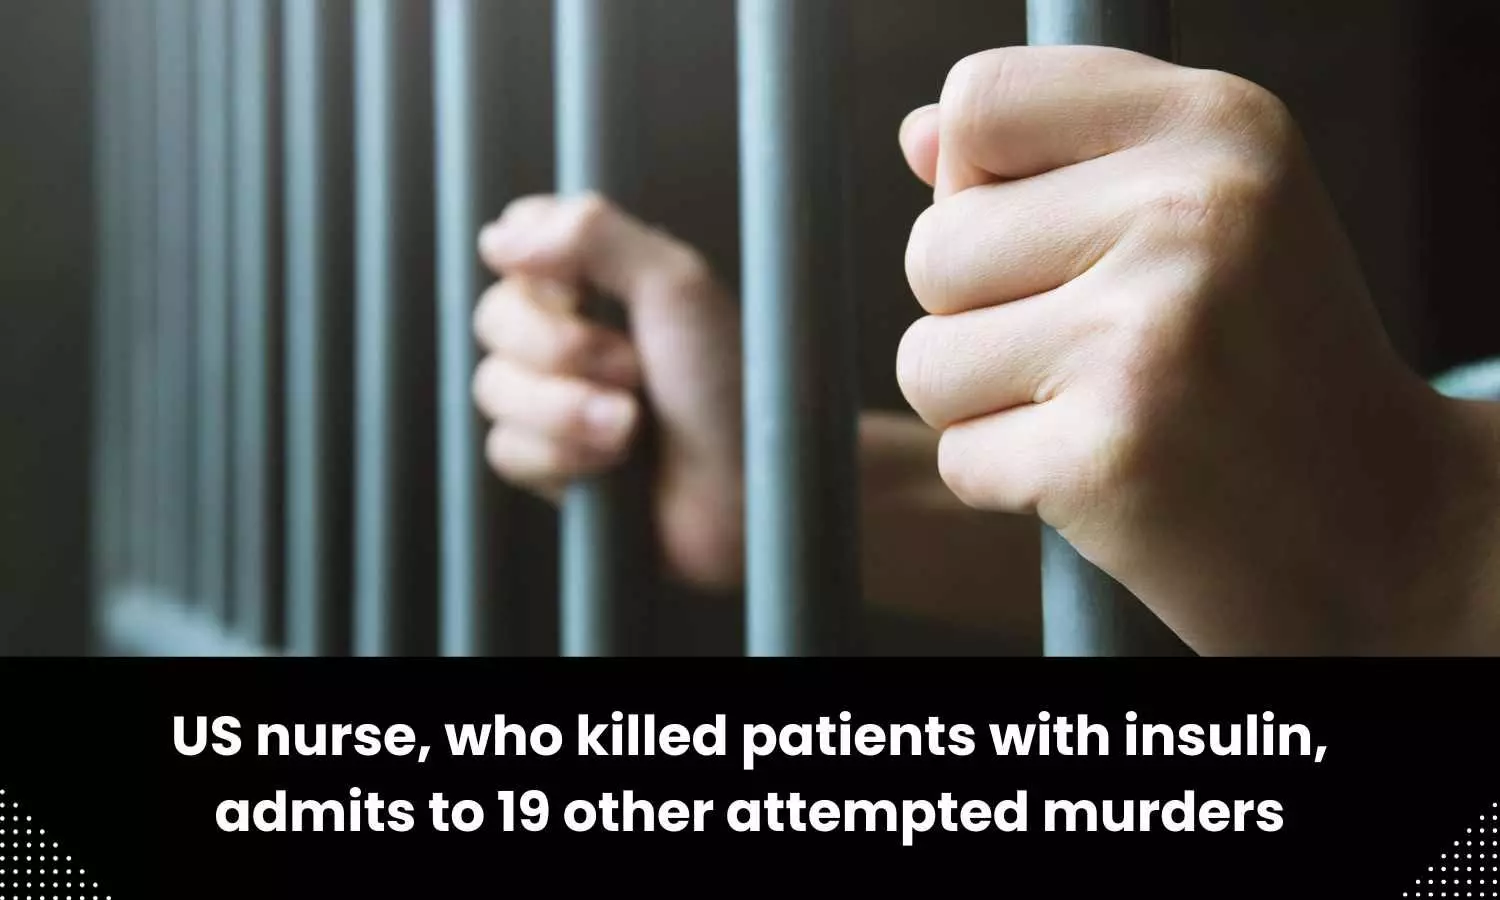 US nurse admits to killing 19 patients with insulin